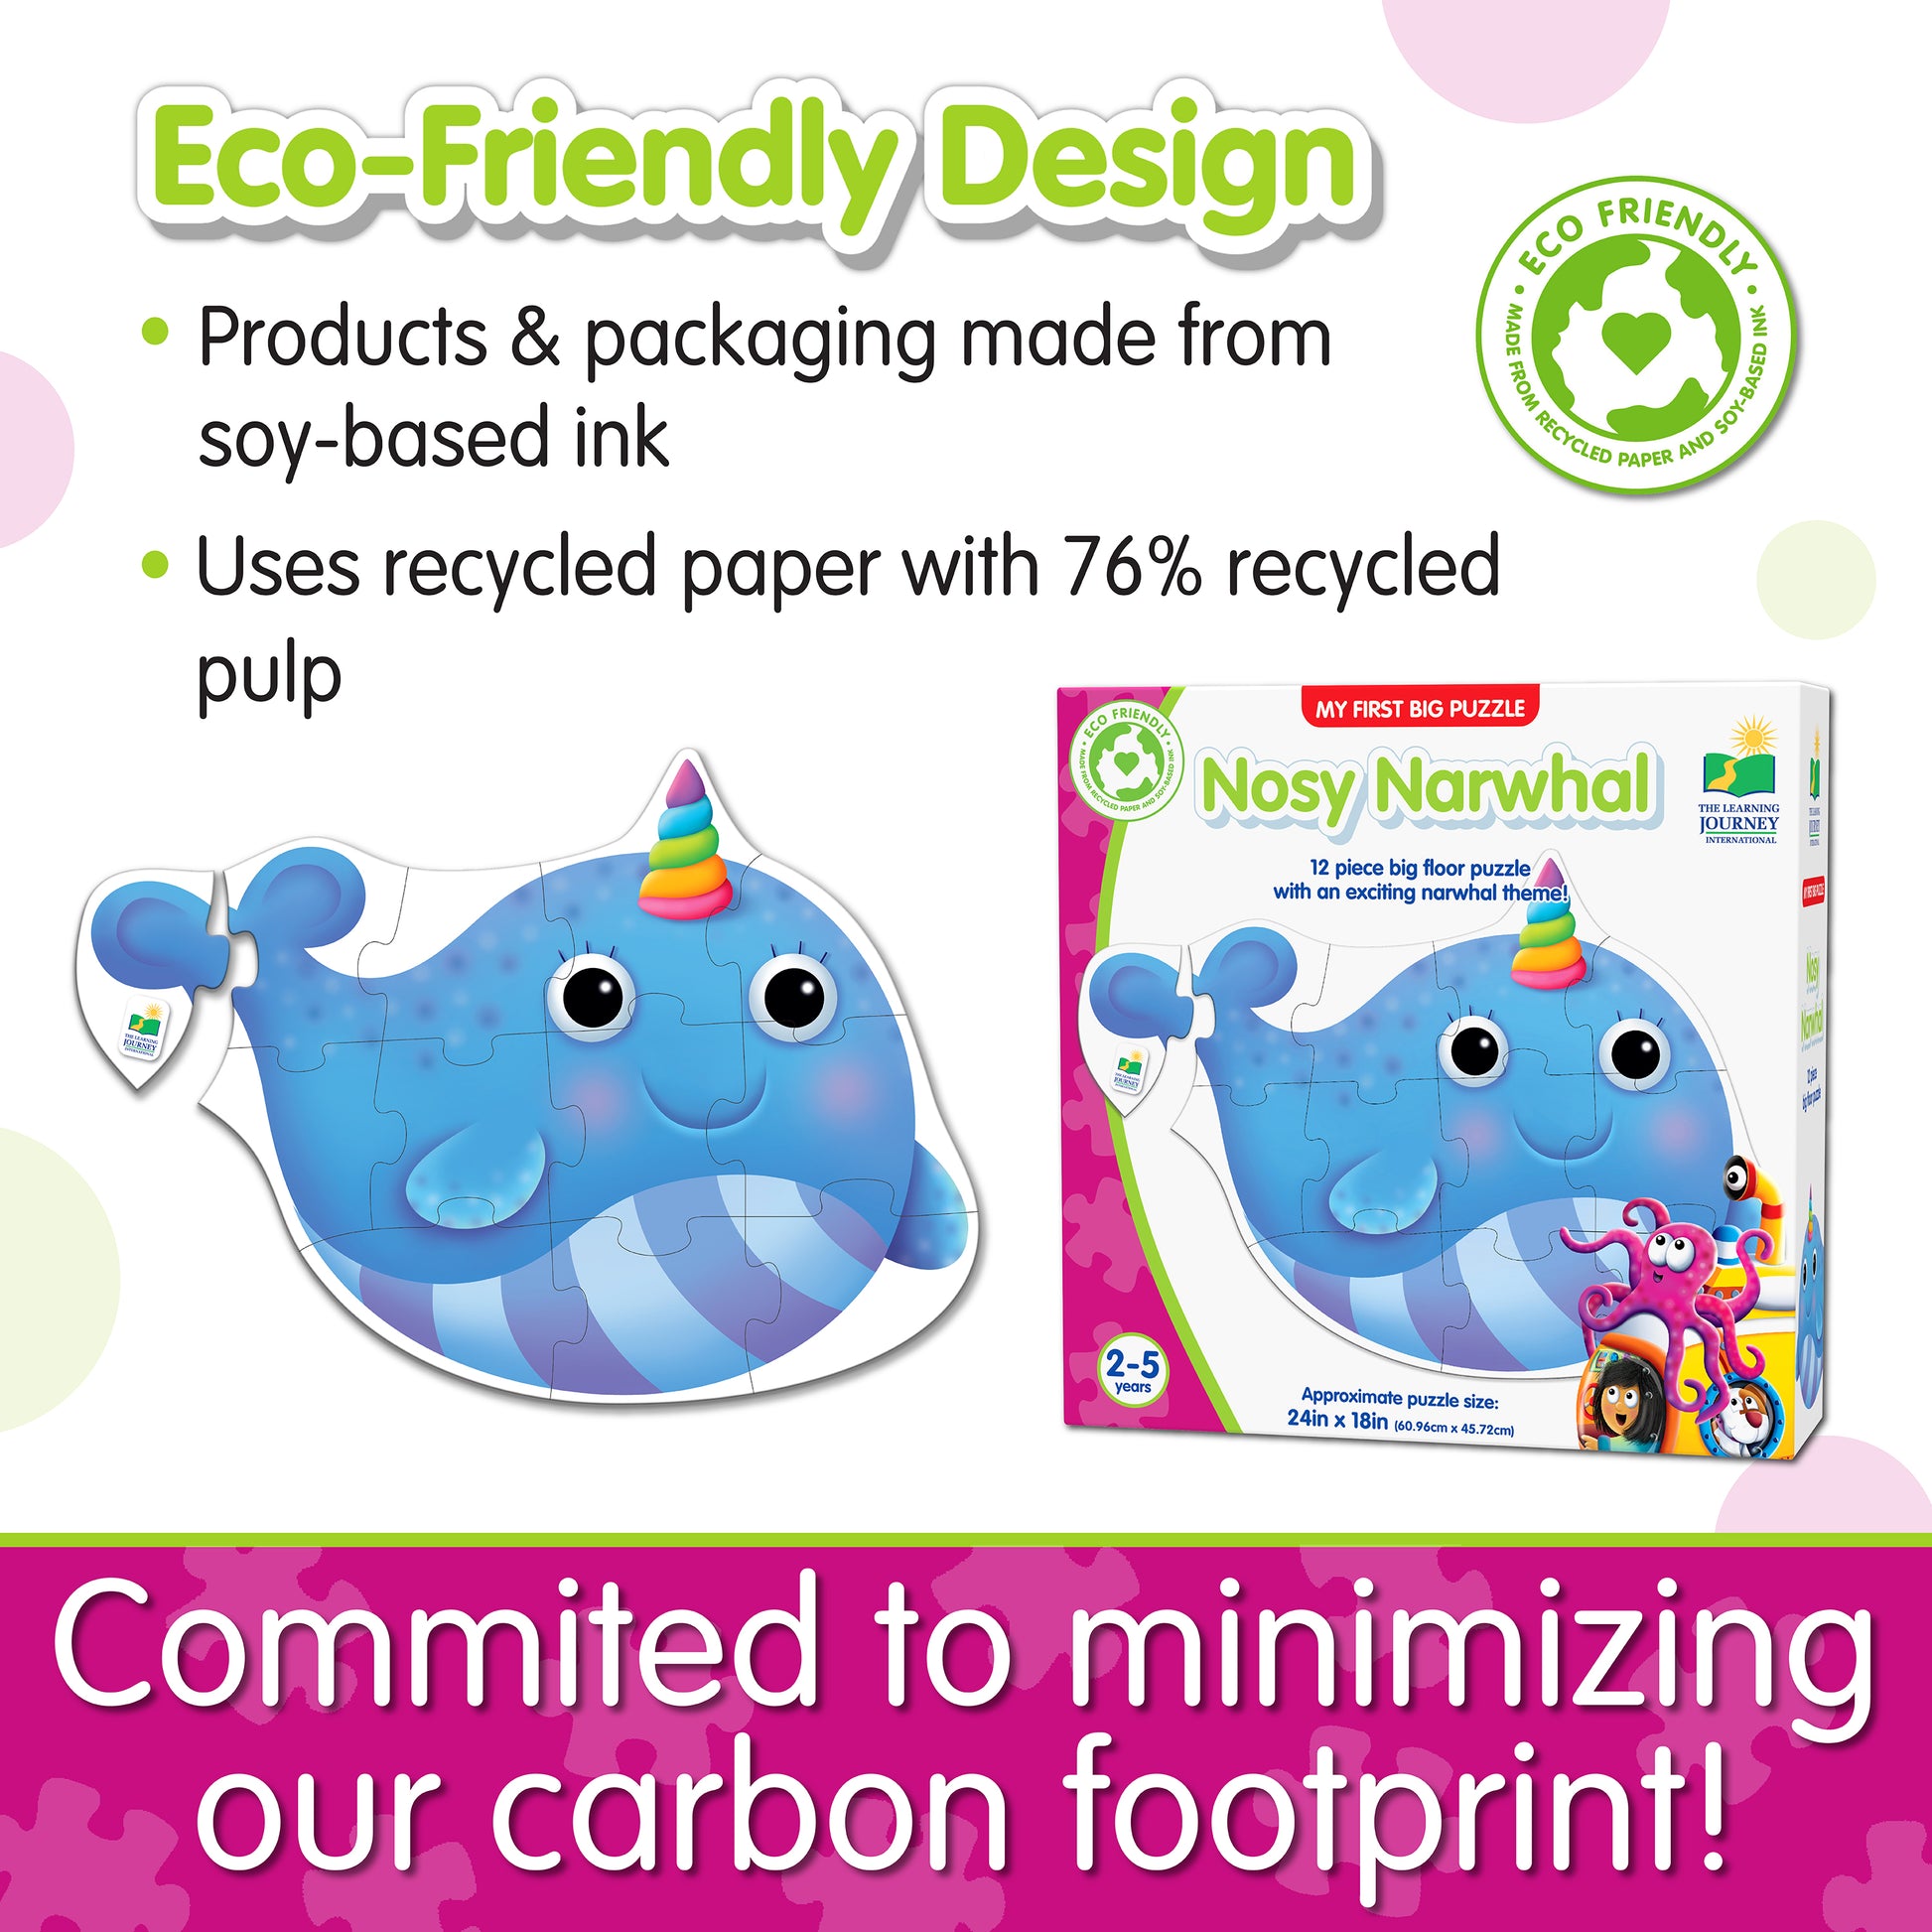 Infographic about My First Big Puzzle - Nosy Narwhal's eco-friendly design that says, "Committed to minimizing our carbon footprint!"